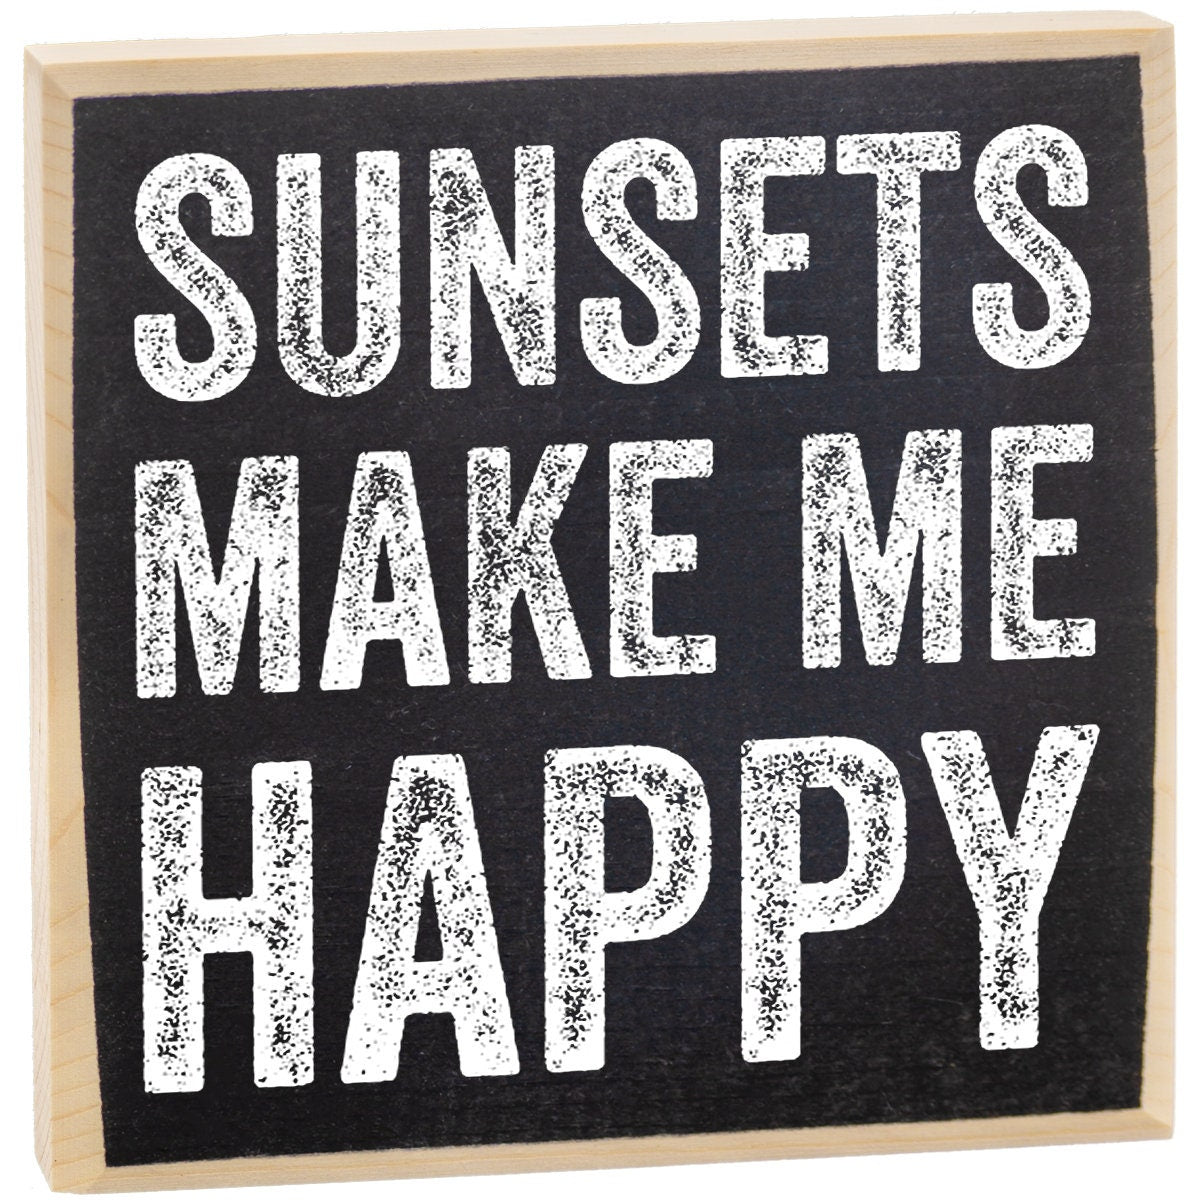 Sunsets Make Me Happy - Rustic Wooden Sign - Makes a Great Gift Under 15 Dollars Lone Star Art 